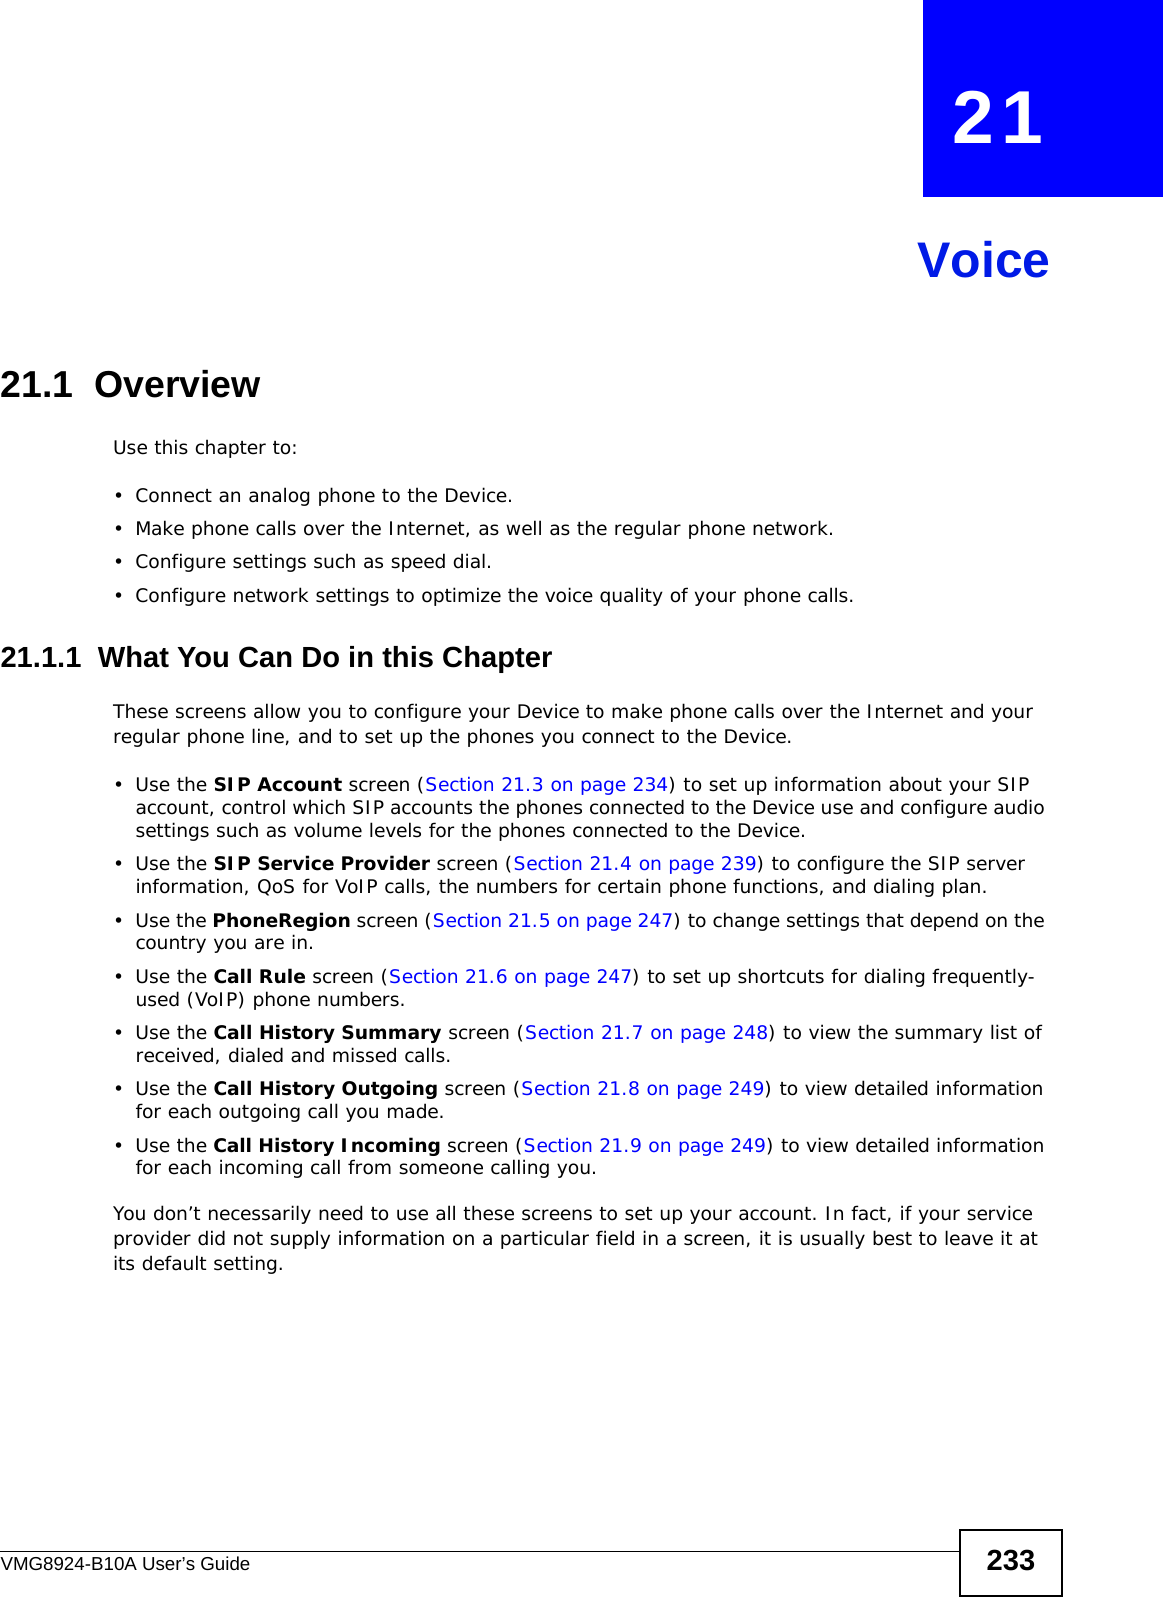 VMG8924-B10A User’s Guide 233CHAPTER   21Voice21.1  OverviewUse this chapter to:• Connect an analog phone to the Device.• Make phone calls over the Internet, as well as the regular phone network.• Configure settings such as speed dial.• Configure network settings to optimize the voice quality of your phone calls.21.1.1  What You Can Do in this ChapterThese screens allow you to configure your Device to make phone calls over the Internet and your regular phone line, and to set up the phones you connect to the Device.•Use the SIP Account screen (Section 21.3 on page 234) to set up information about your SIP account, control which SIP accounts the phones connected to the Device use and configure audio settings such as volume levels for the phones connected to the Device.•Use the SIP Service Provider screen (Section 21.4 on page 239) to configure the SIP server information, QoS for VoIP calls, the numbers for certain phone functions, and dialing plan. •Use the PhoneRegion screen (Section 21.5 on page 247) to change settings that depend on the country you are in.•Use the Call Rule screen (Section 21.6 on page 247) to set up shortcuts for dialing frequently-used (VoIP) phone numbers.•Use the Call History Summary screen (Section 21.7 on page 248) to view the summary list of received, dialed and missed calls.•Use the Call History Outgoing screen (Section 21.8 on page 249) to view detailed information for each outgoing call you made.•Use the Call History Incoming screen (Section 21.9 on page 249) to view detailed information for each incoming call from someone calling you.You don’t necessarily need to use all these screens to set up your account. In fact, if your service provider did not supply information on a particular field in a screen, it is usually best to leave it at its default setting.